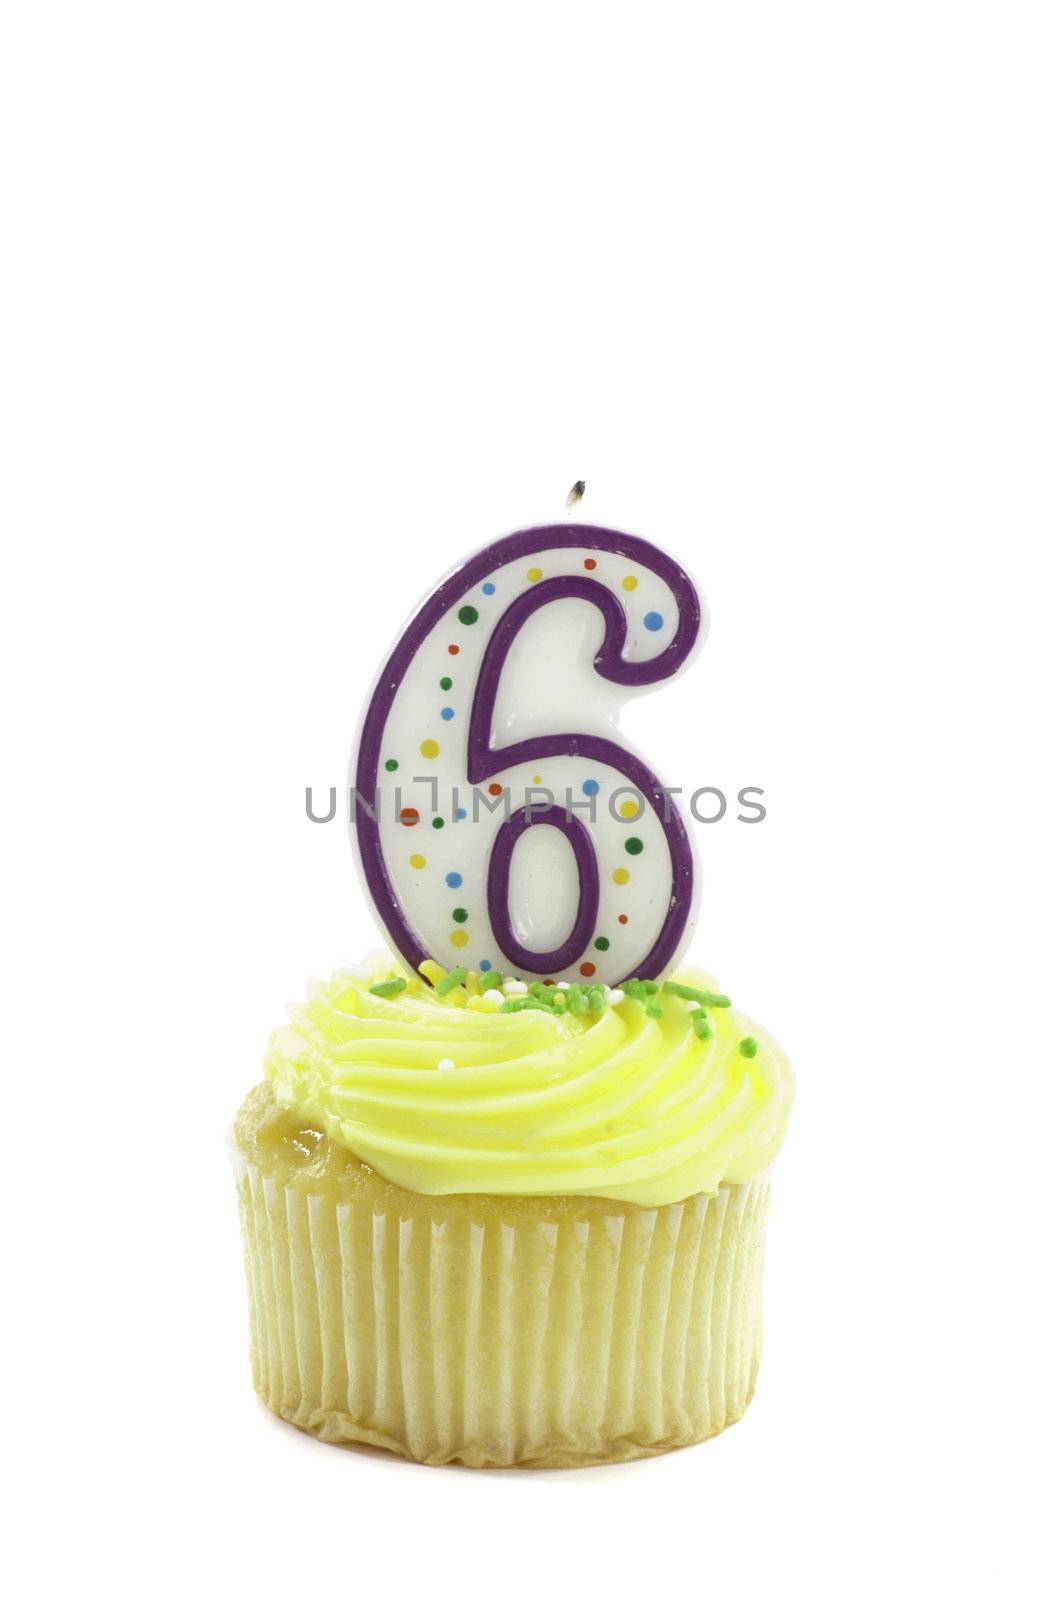 cupcake, isolated on white with a decorative candle in the shape of a number six